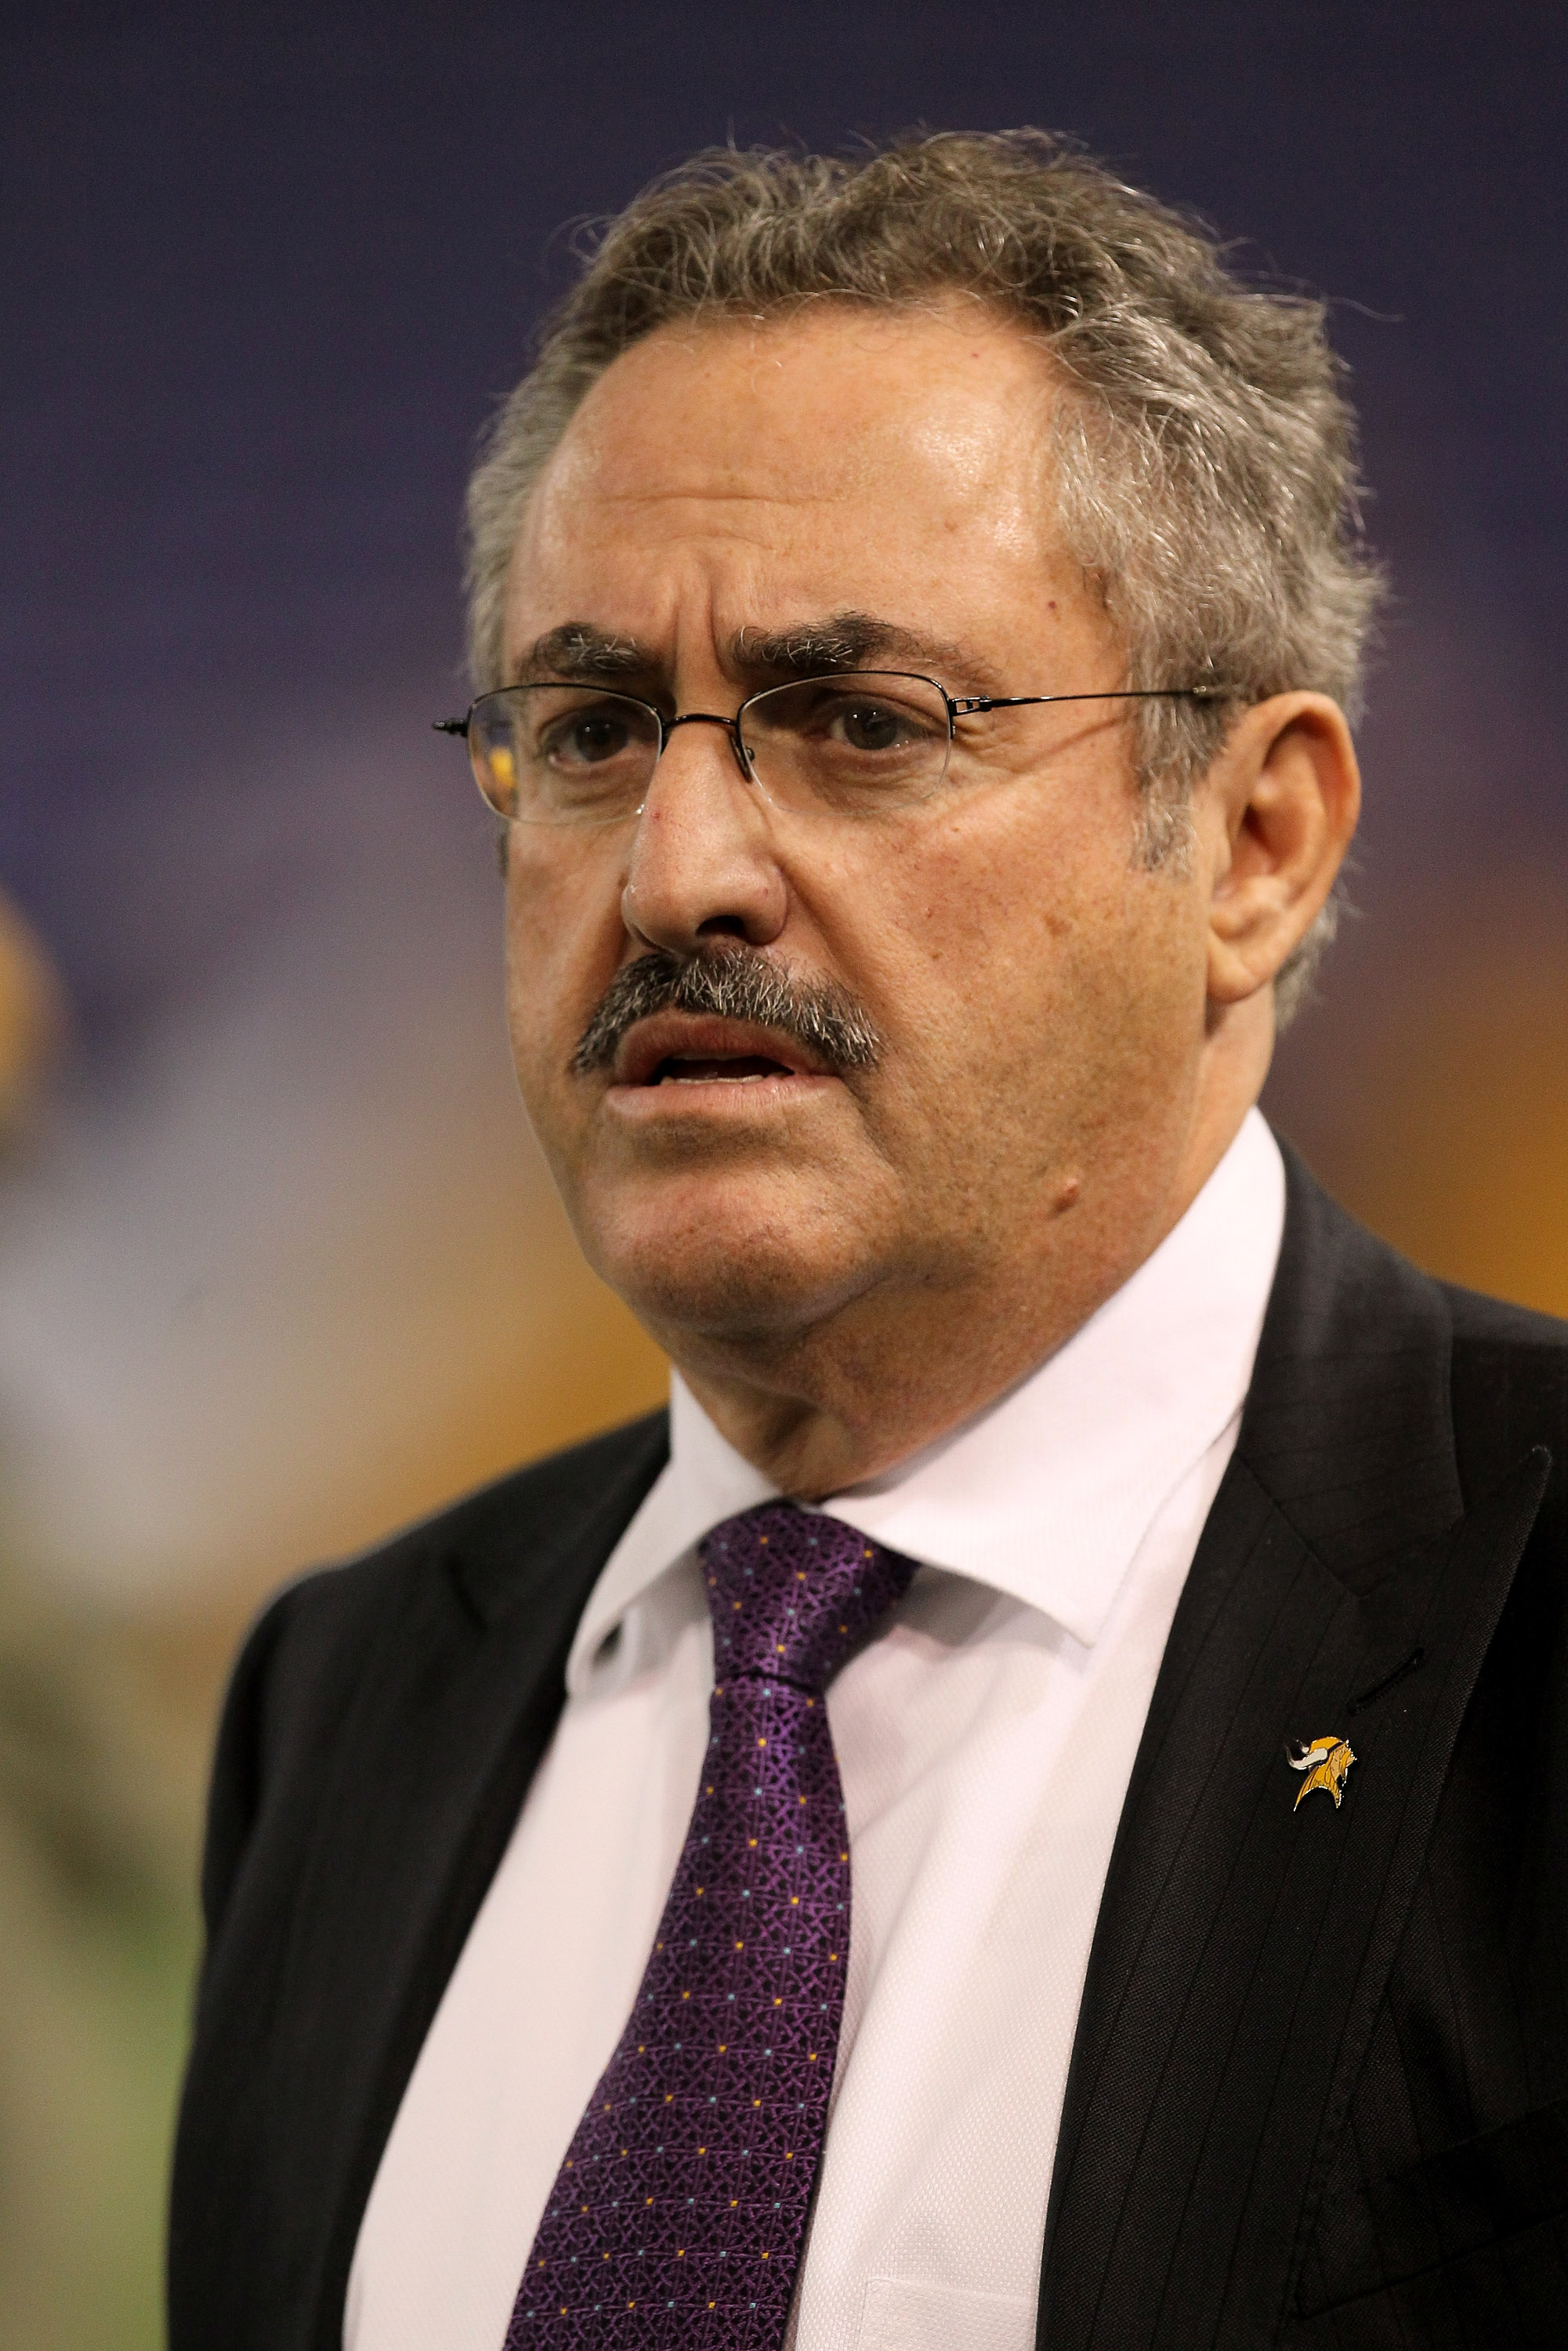 MINNEAPOLIS - NOVEMBER 07:  Owner Zygi Wilf of the Minnesota Vikings looks on during warmups for the game with the Arizona Cardinals at Hubert H. Humphrey Metrodome on November 7, 2010 in Minneapolis, Minnesota.  (Photo by Stephen Dunn/Getty Images)